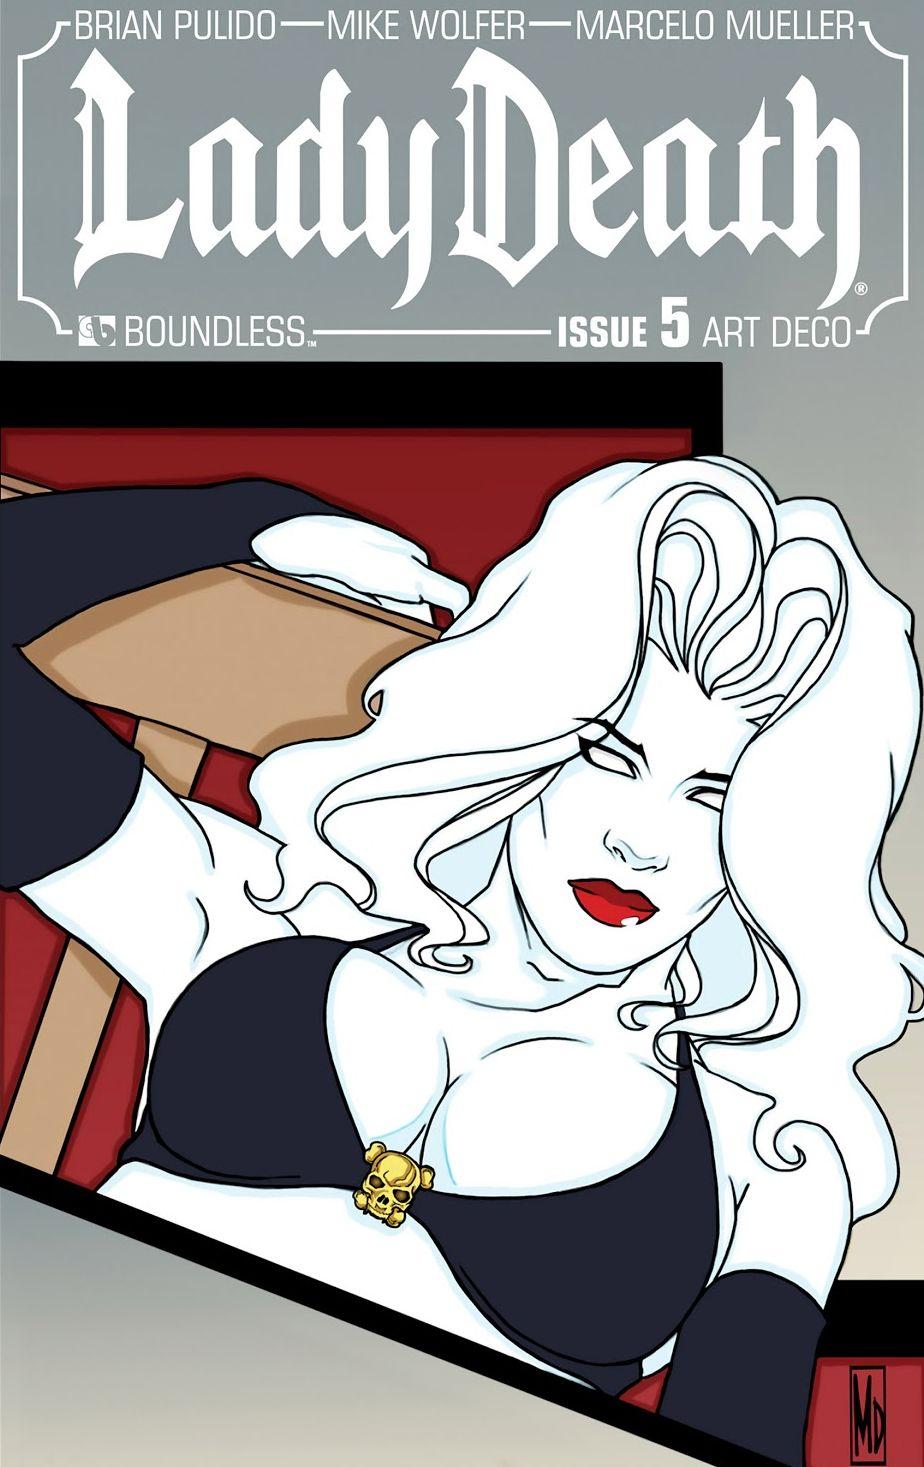 25 Hot Pictures Of Lady Death – One Of The Hottest Comic Book Character Of All Time. | Best Of Comic Books